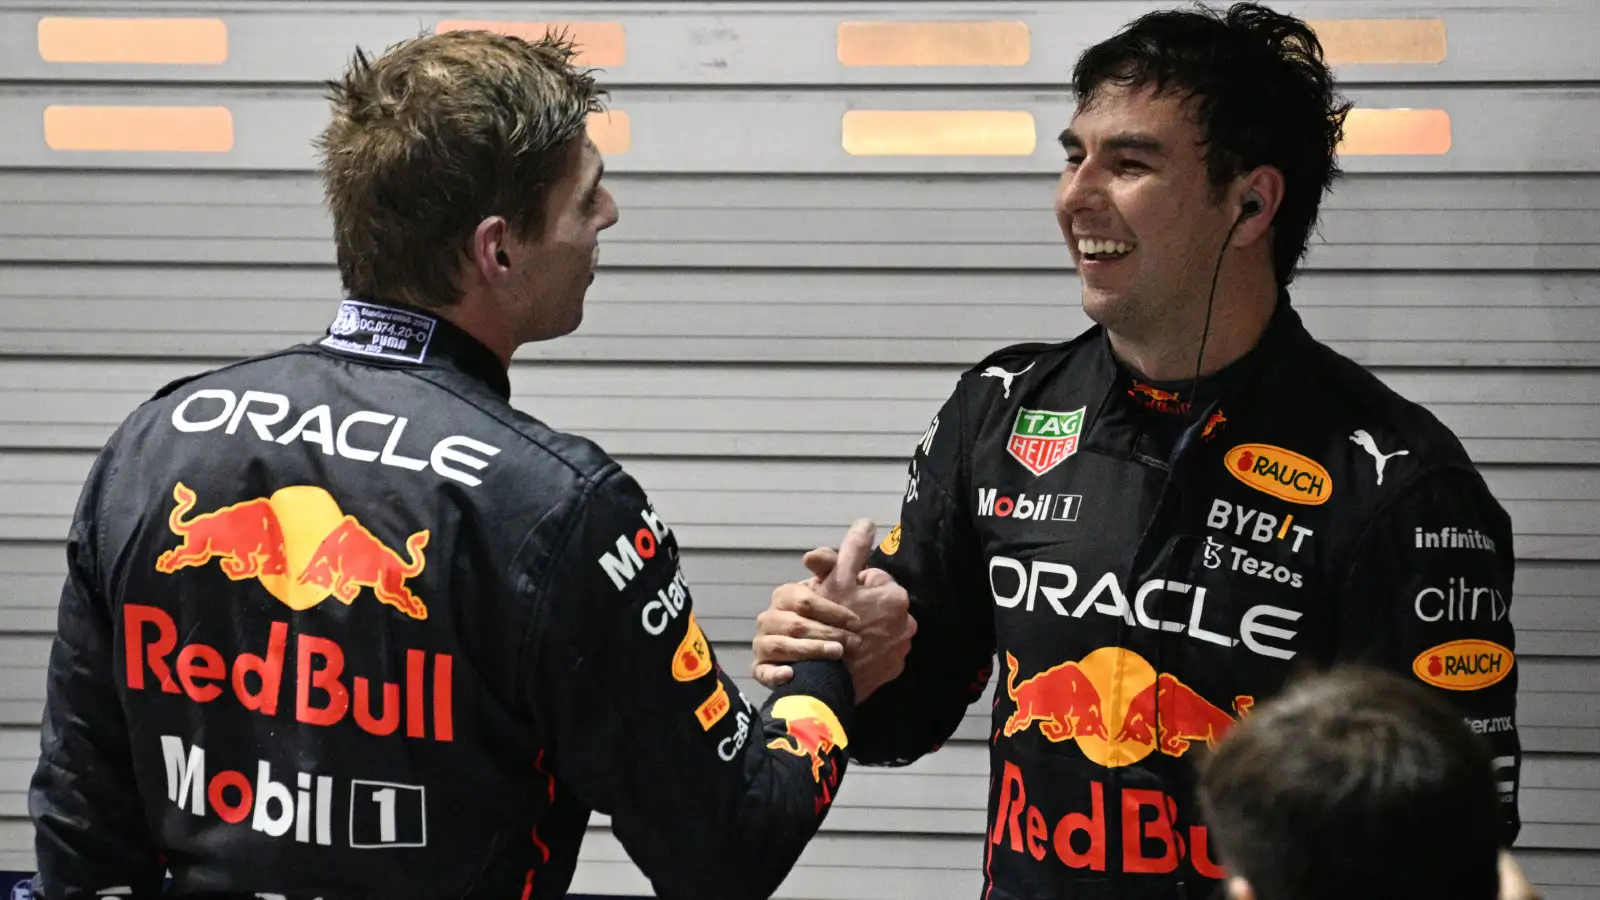 Red Bull drivers Max Verstappen and Sergio Perez at the 2022 Singapore Grand Prix.